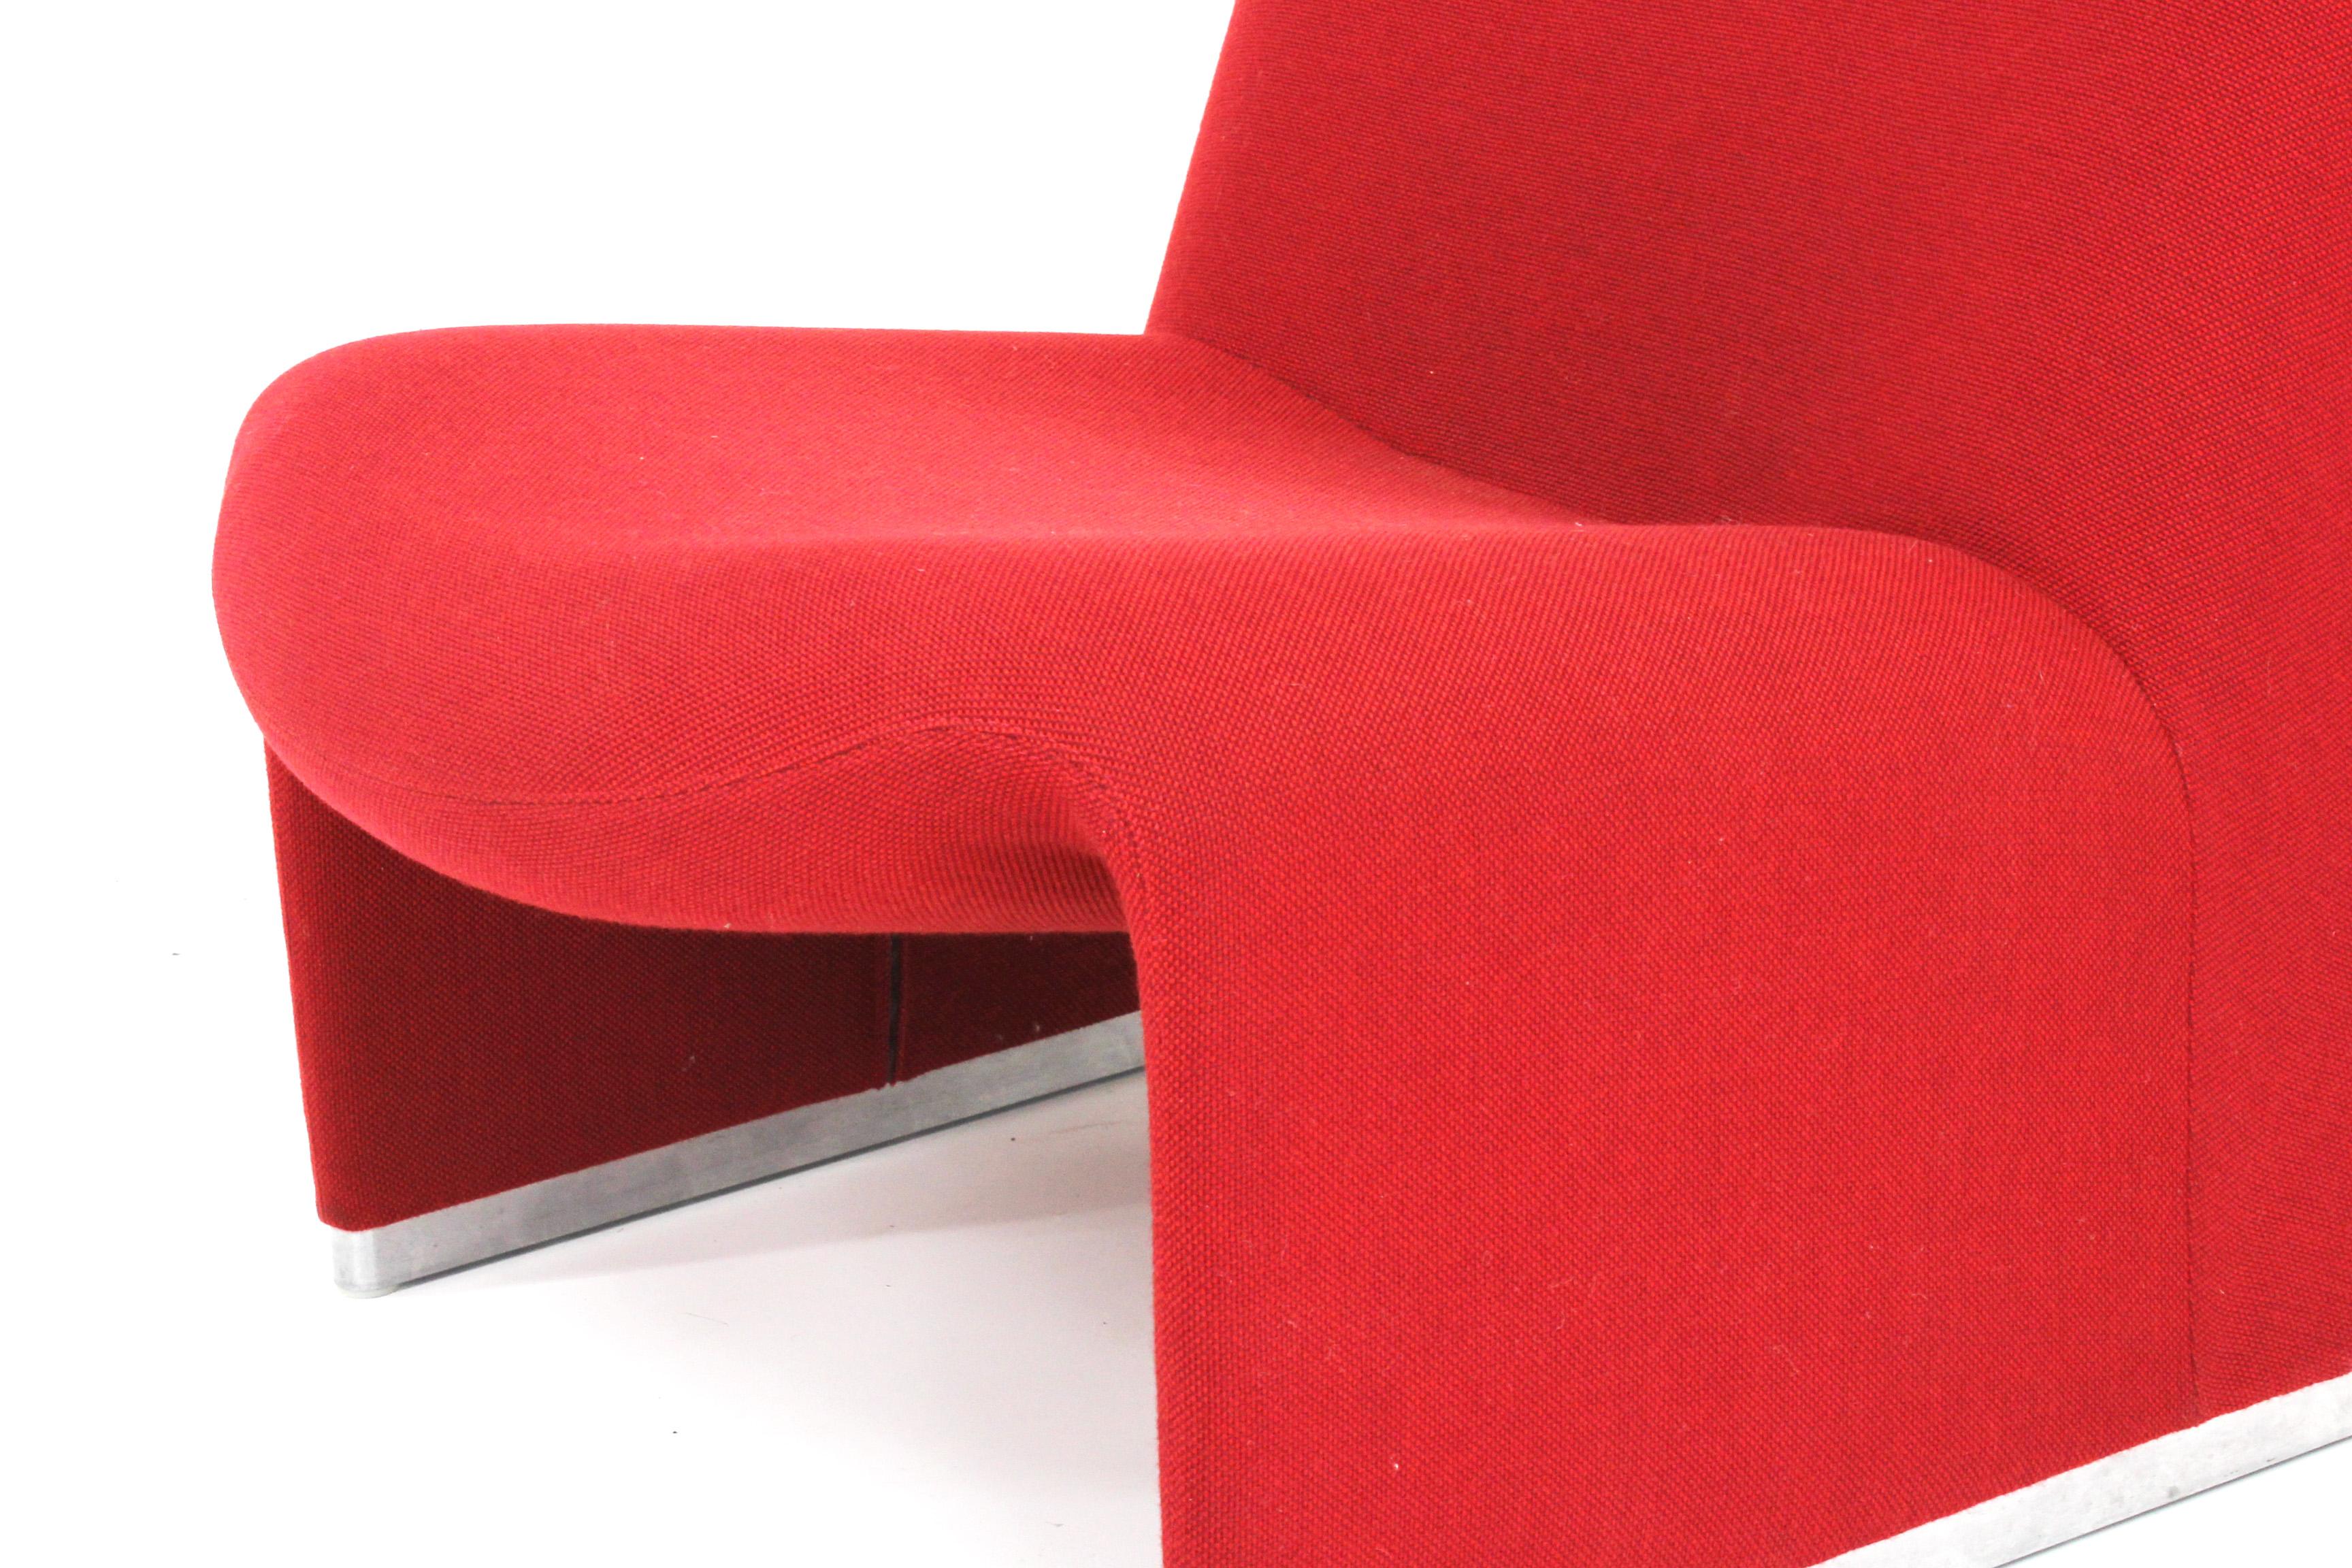 Late 20th Century Giancarlo Piretti Alky Lounge Chair in Red / Magenta Fabric for Anonima Castelli